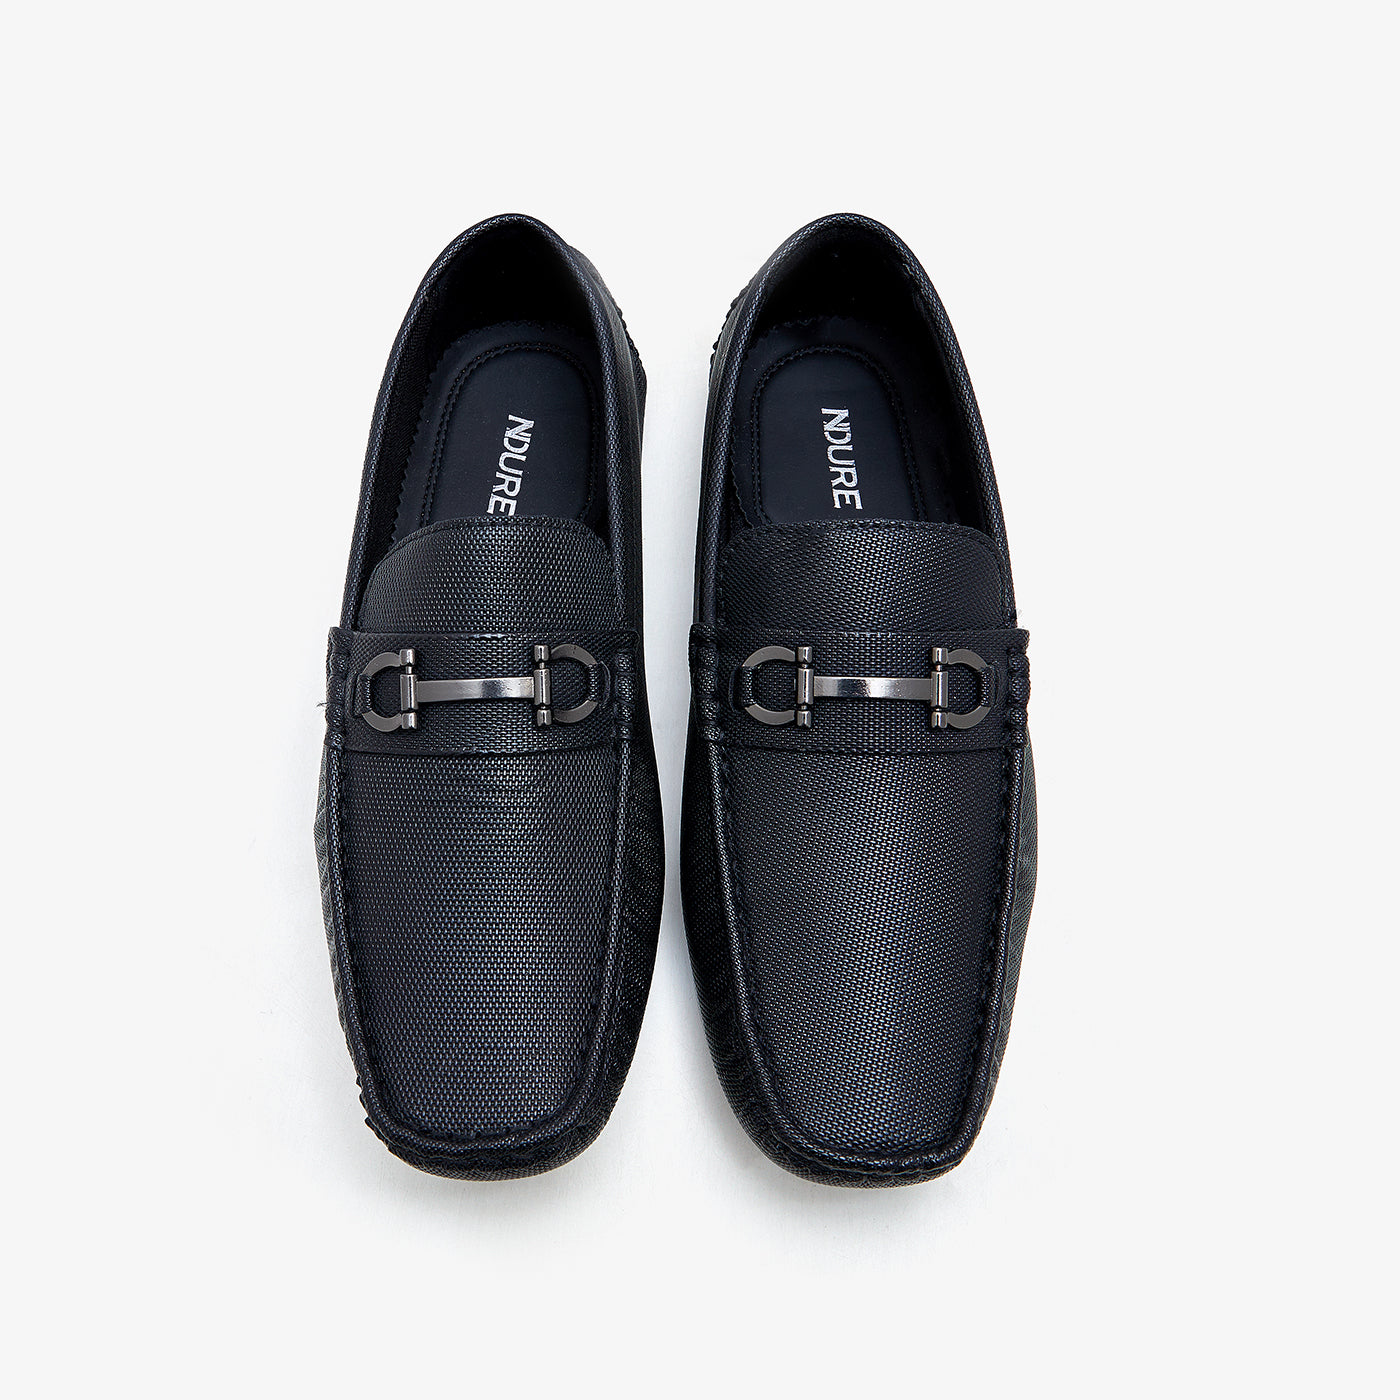 Men's Buckled Loafers